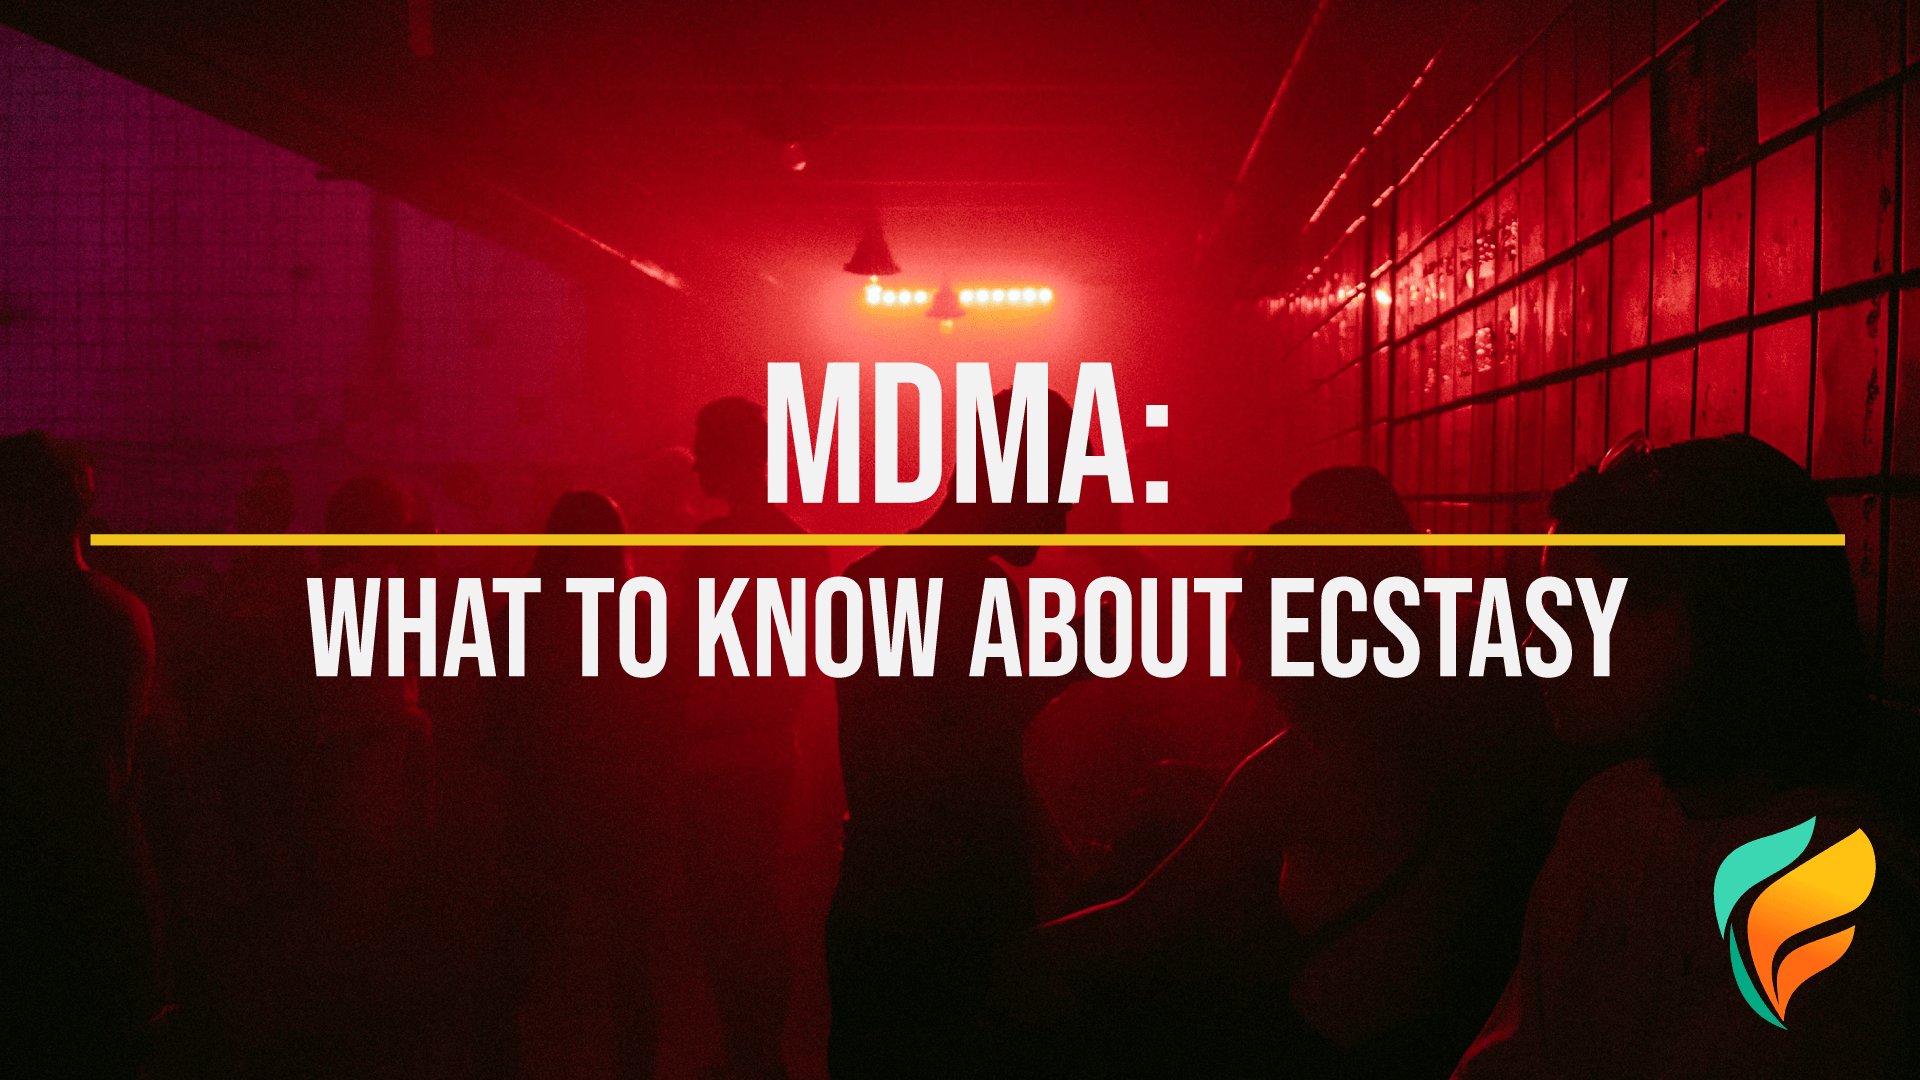 MDMA: Facts & More About Ecstasy